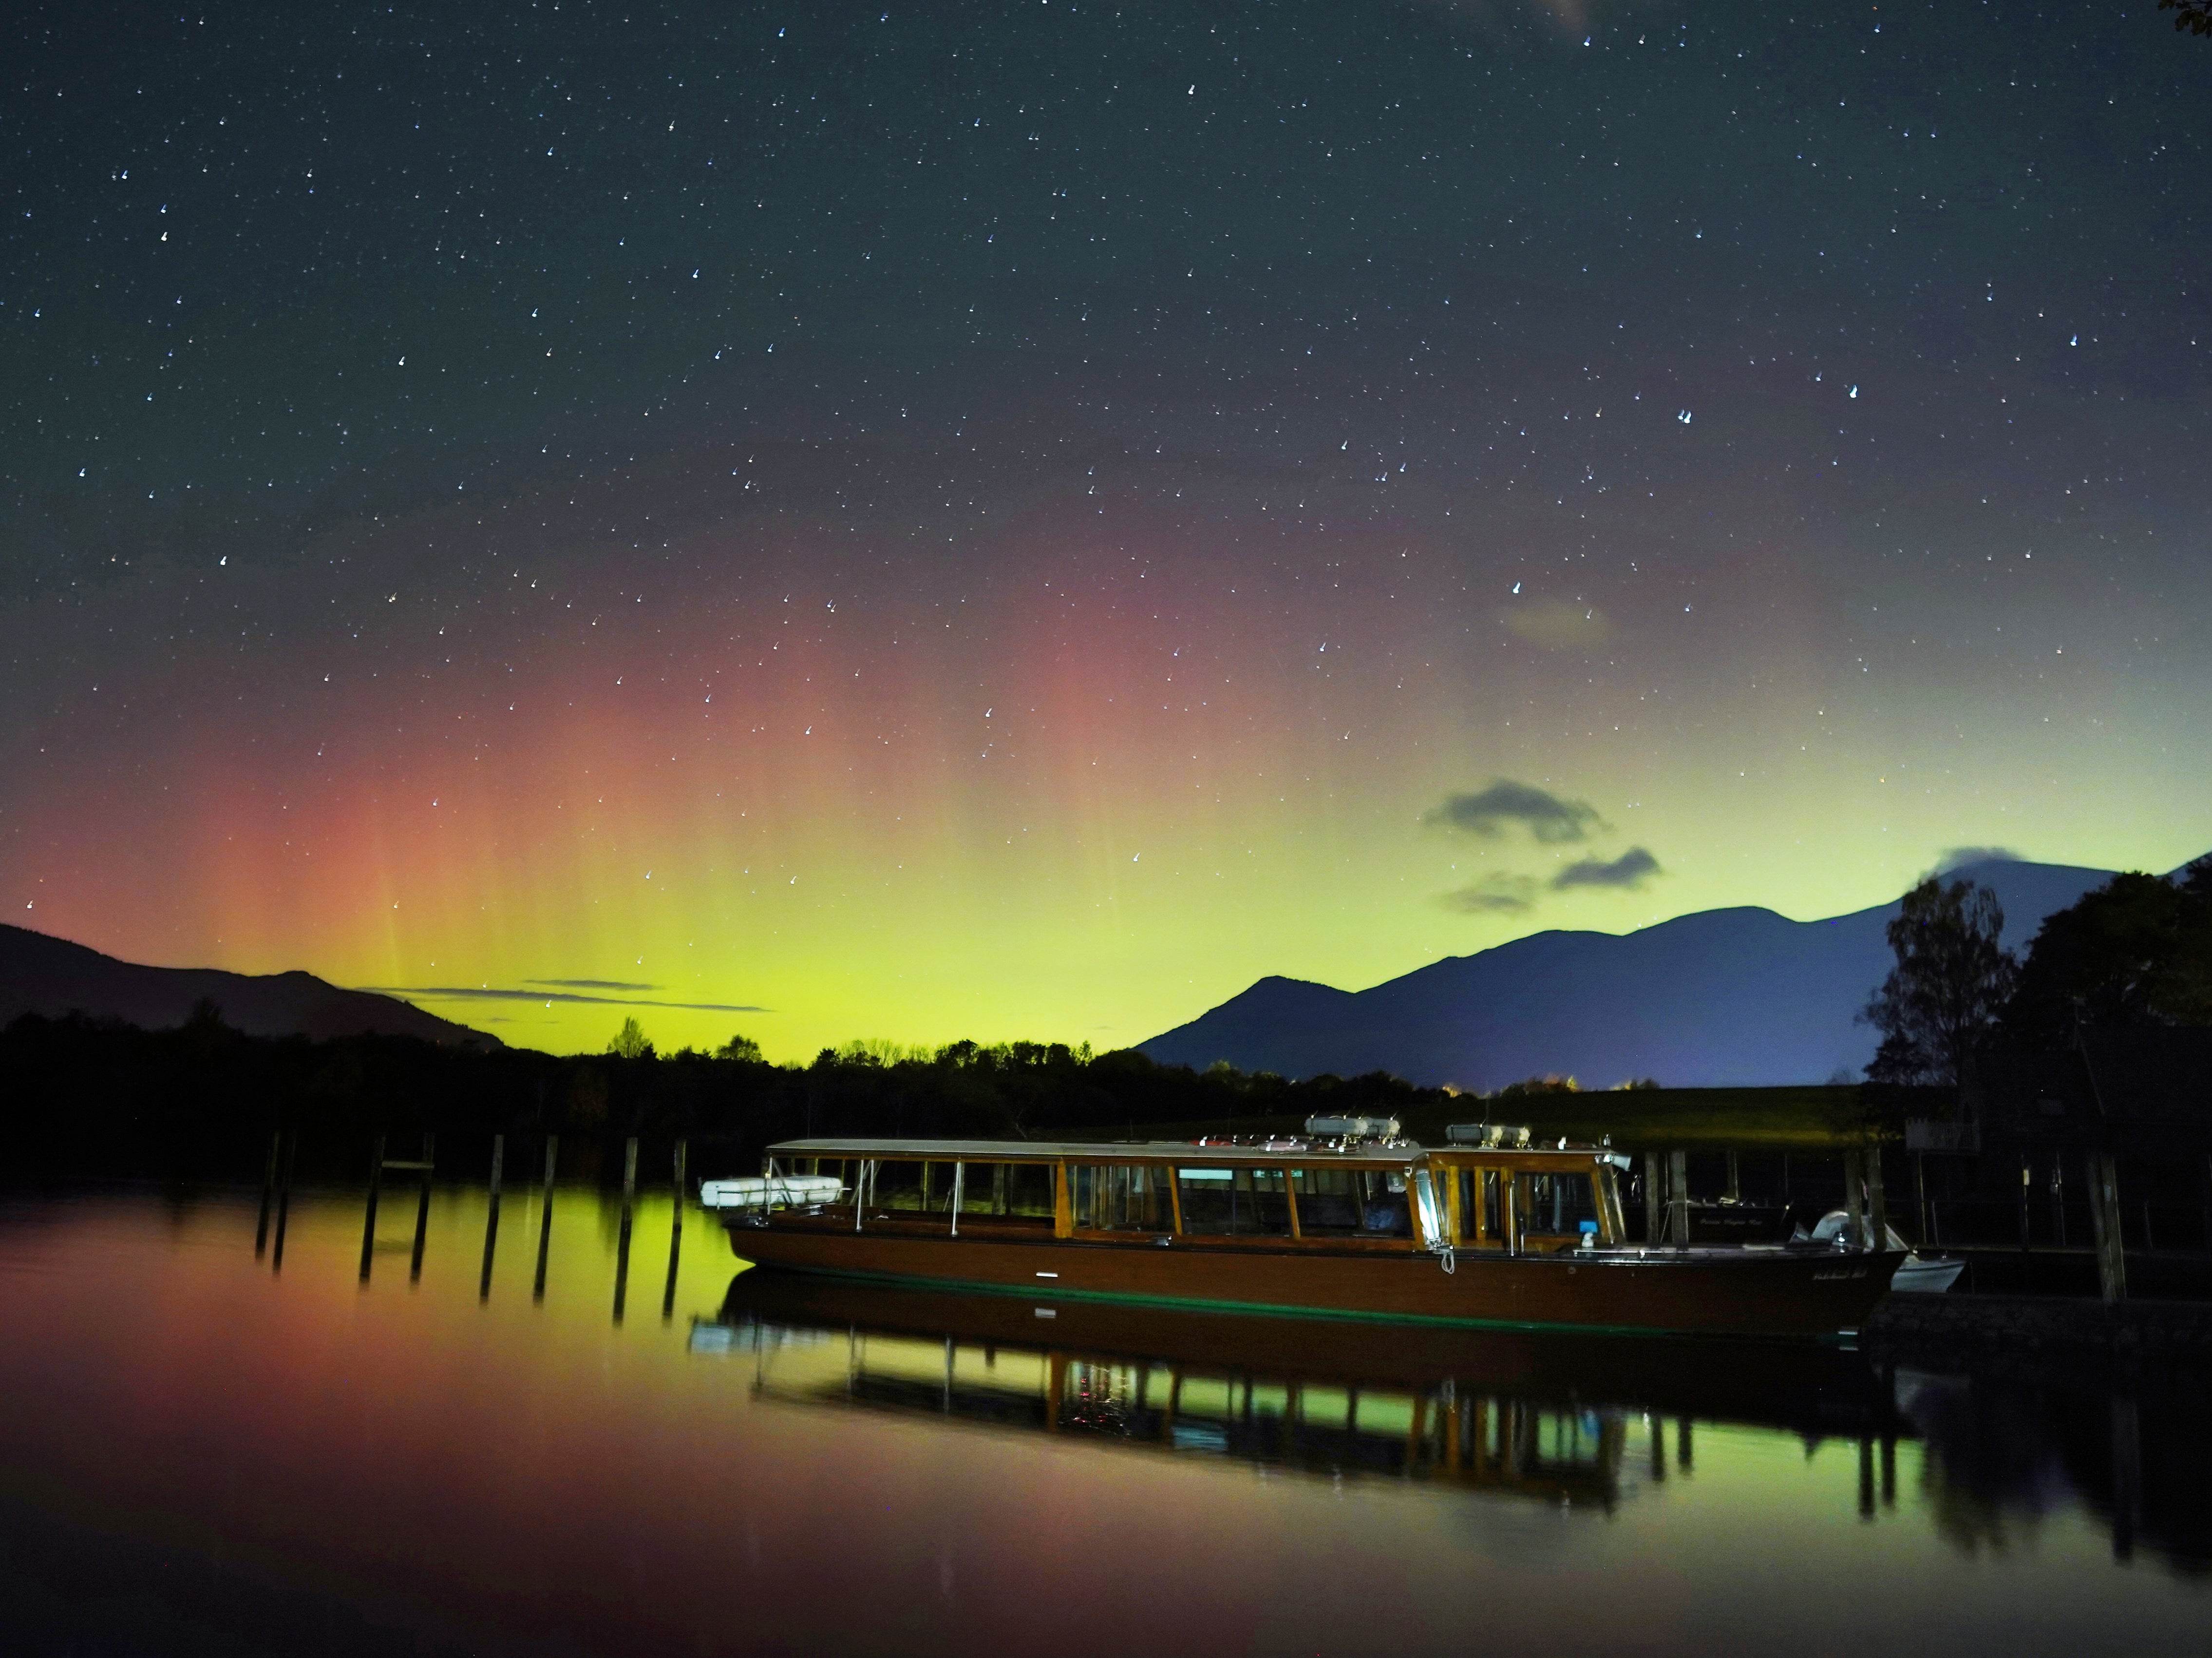 <p>A spectacular display of the Northern Lights seen over Derwentwater near Keswick in the Lake District in early hhours of 4 November 2021</p>